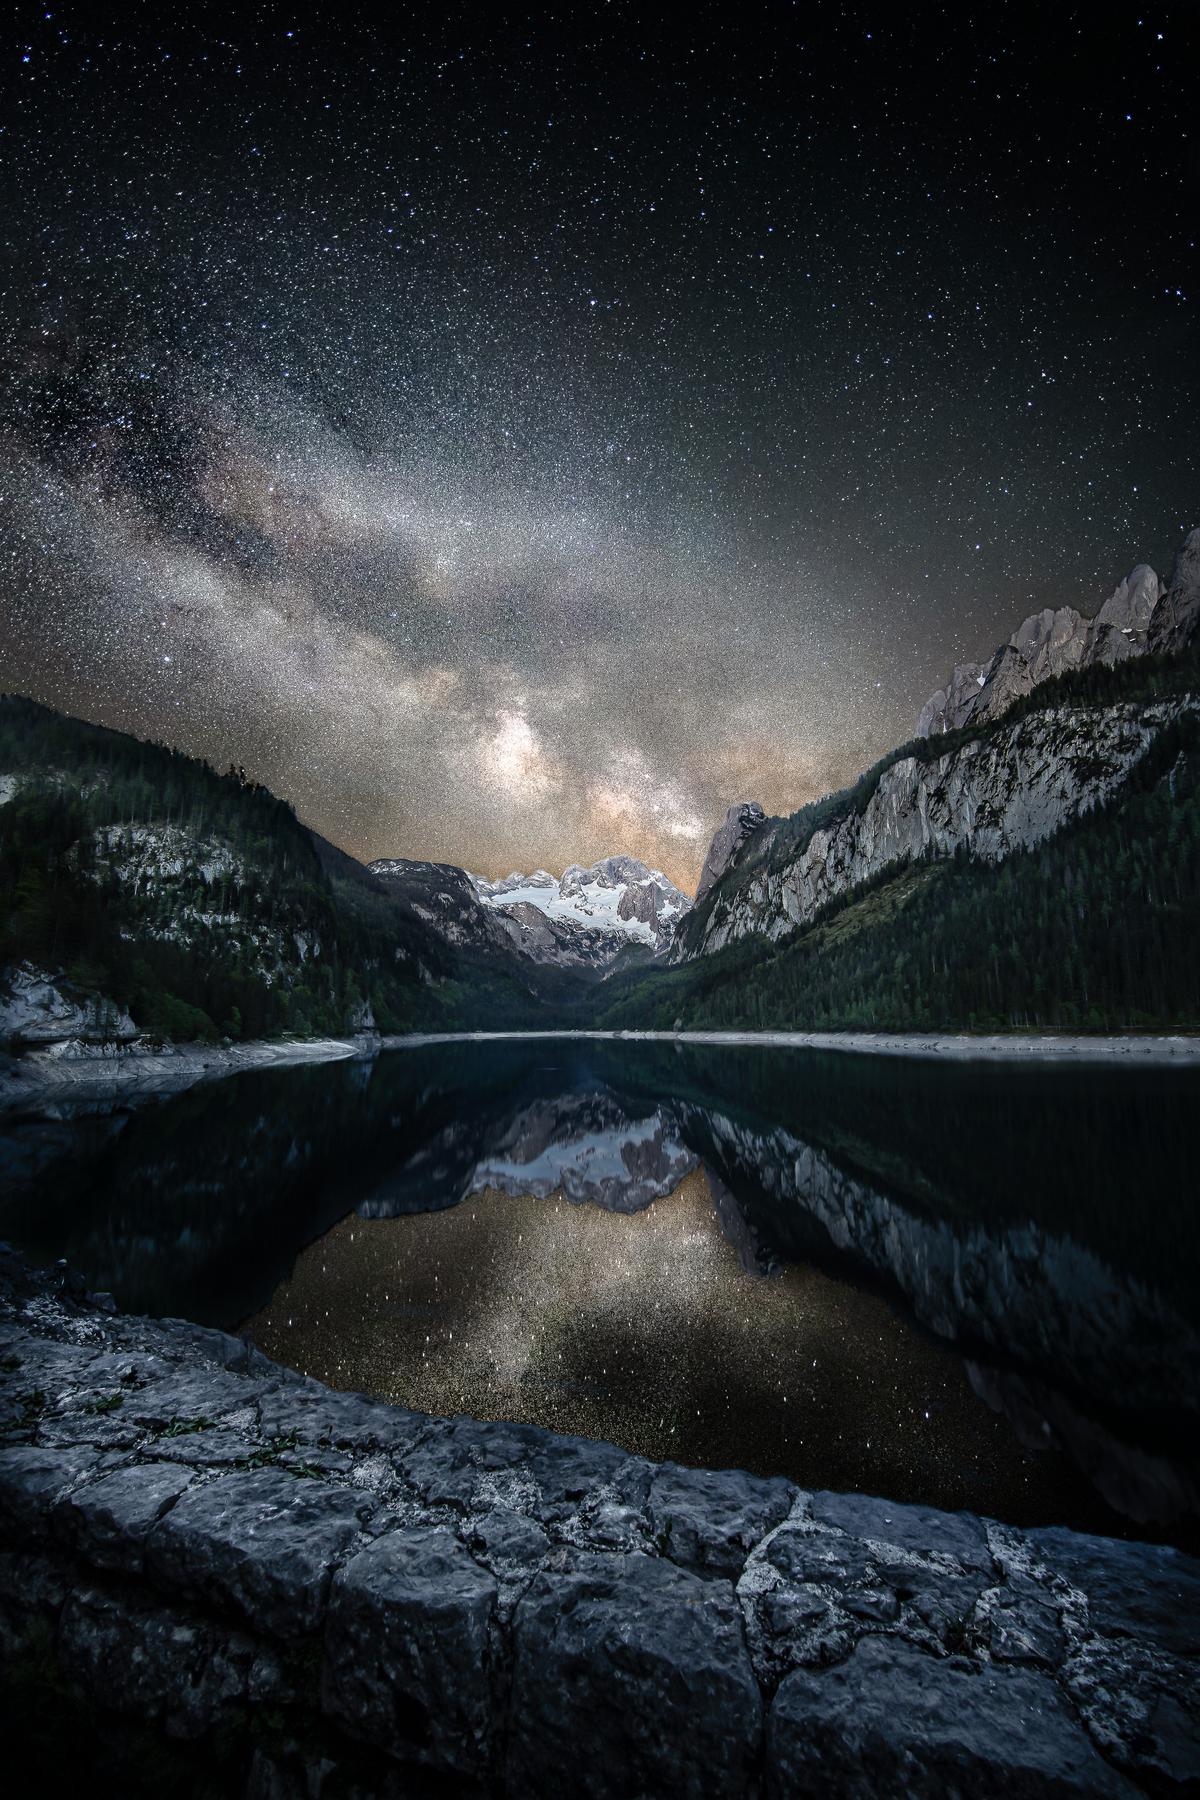 "Milky Way in Salzkammergut" by Sonja Ivancsics, Austria; "I planned this photo for about a year, and on that night in June 2021 the conditions were just perfect. The Gosausee lake in Salzkammergut reflects its surrounding mountains beautifully, especially the mountain Dachstein with its glacier. The picture blends two images, one taken in the blue hour, and one taken at about midnight." (© Sonja Ivancsics, Austria, Winner, National Awards, Landscape, 2022 Sony World Photography Awards)